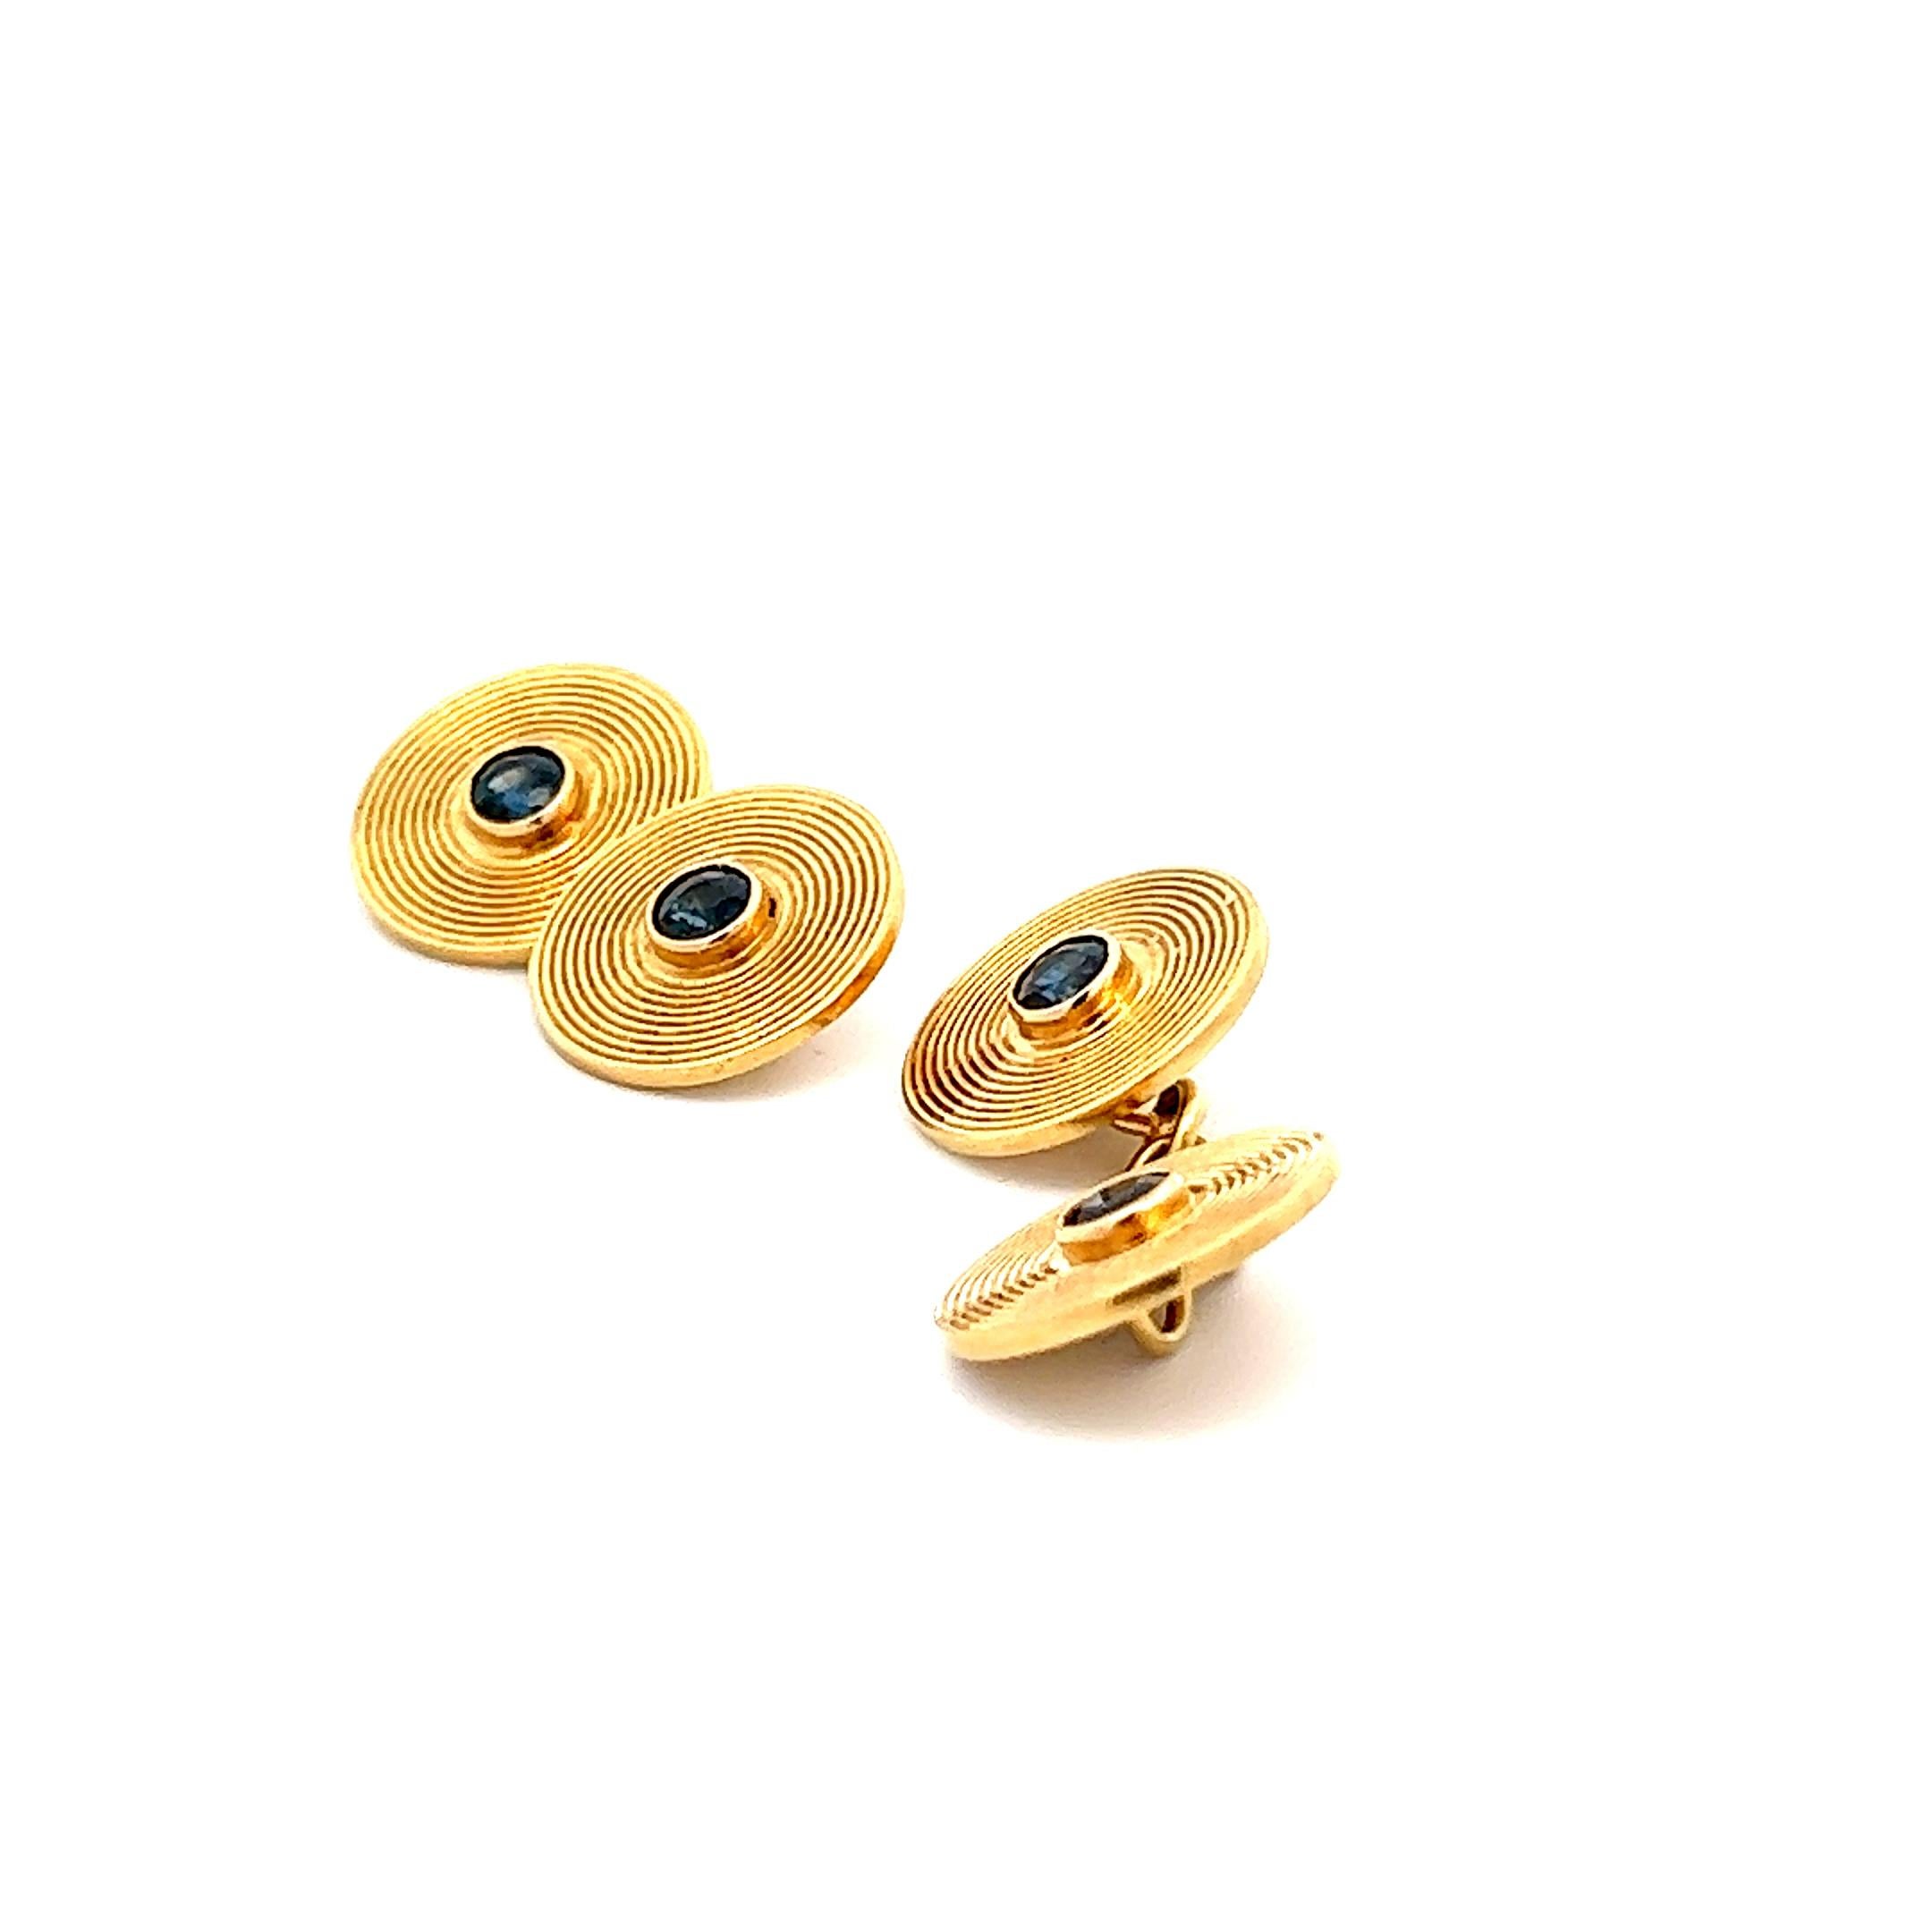 This is a fantastic pair of French Cartier sapphire cufflinks made in 18k yellow gold from the 1950s. The cufflinks are signed Cartier and have the correct marks for the time. There are four, 1.20 total weight round cut sapphires, one in each button